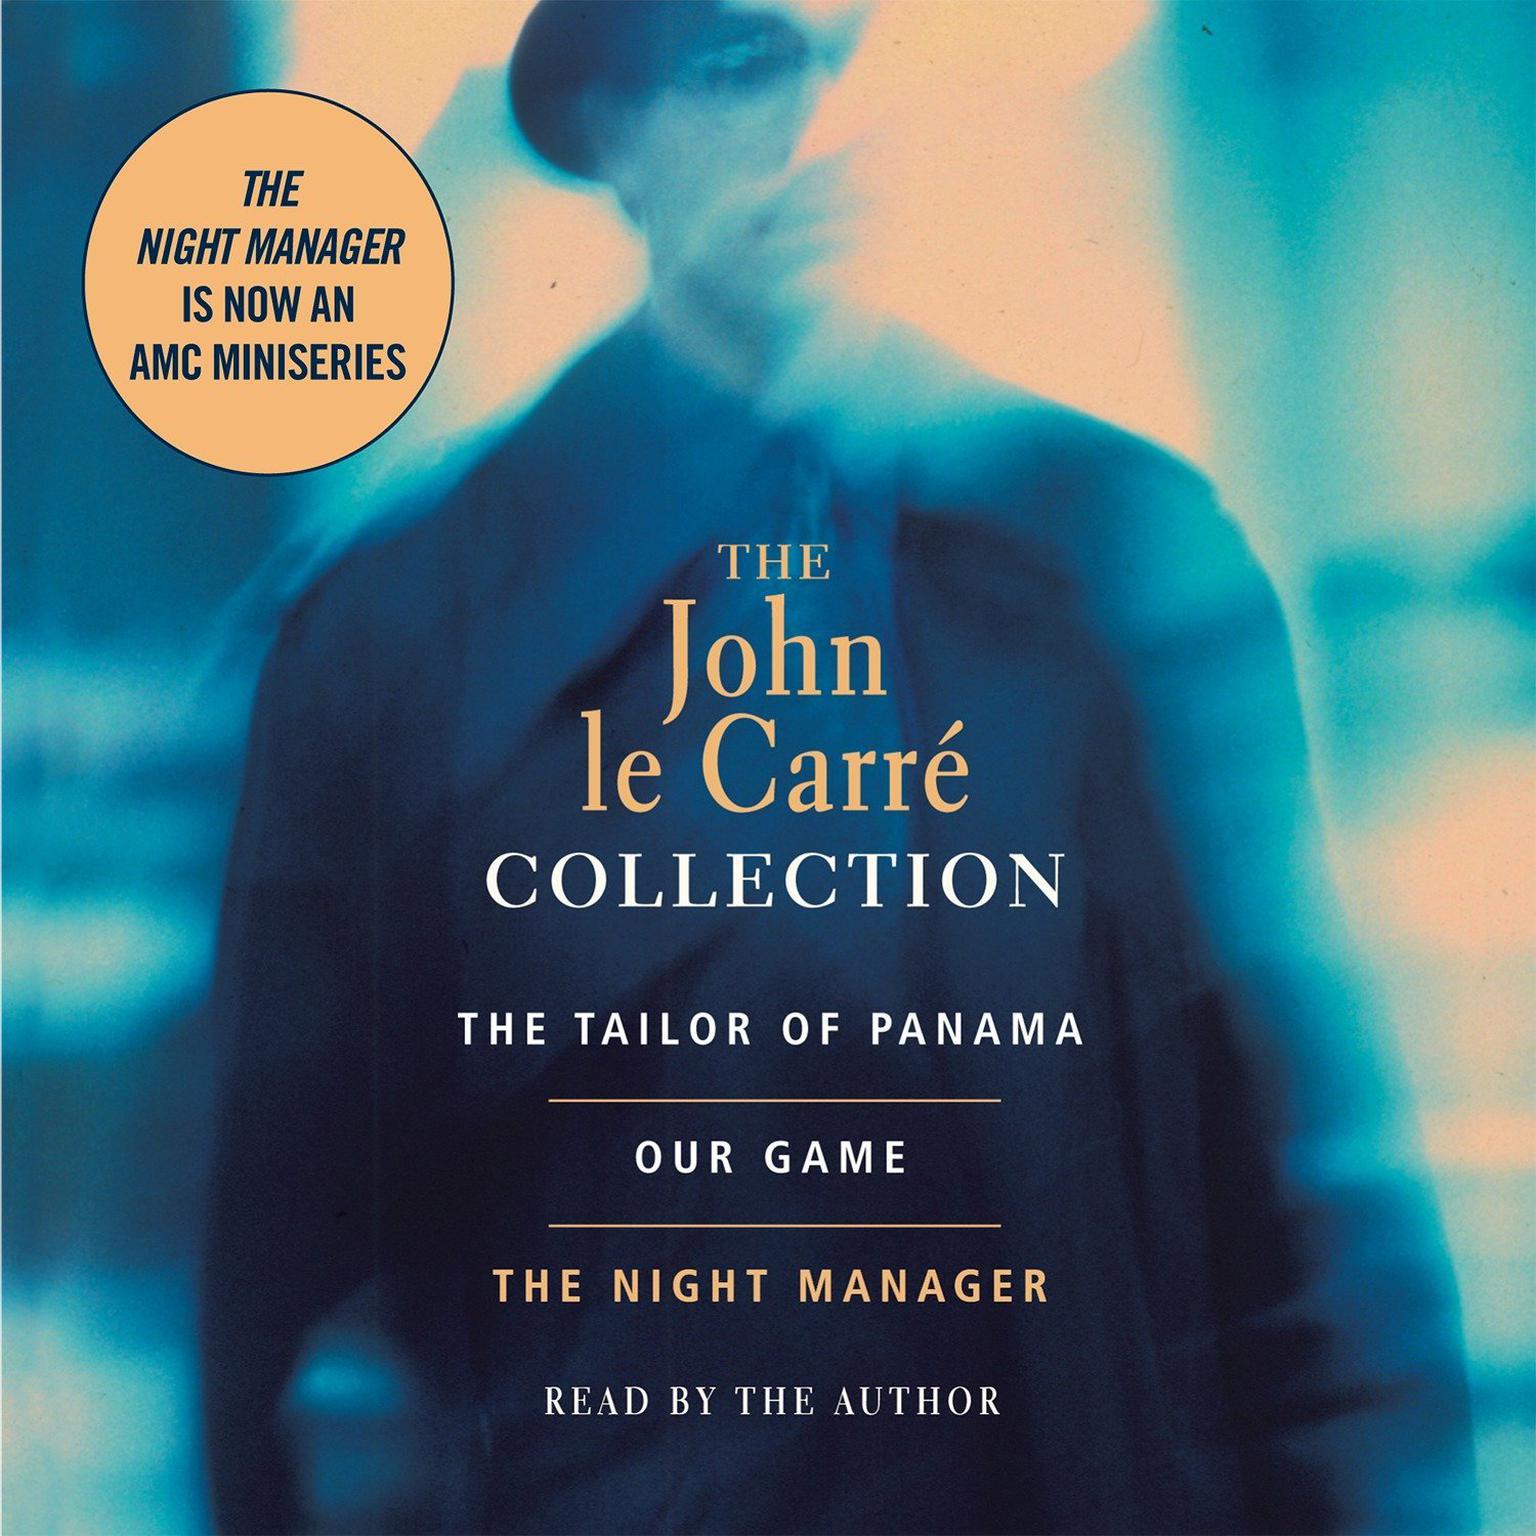 John Le Carre Value Collection (Abridged): Tailor of Panama, Our Game, and Night Manager Audiobook, by John le Carré